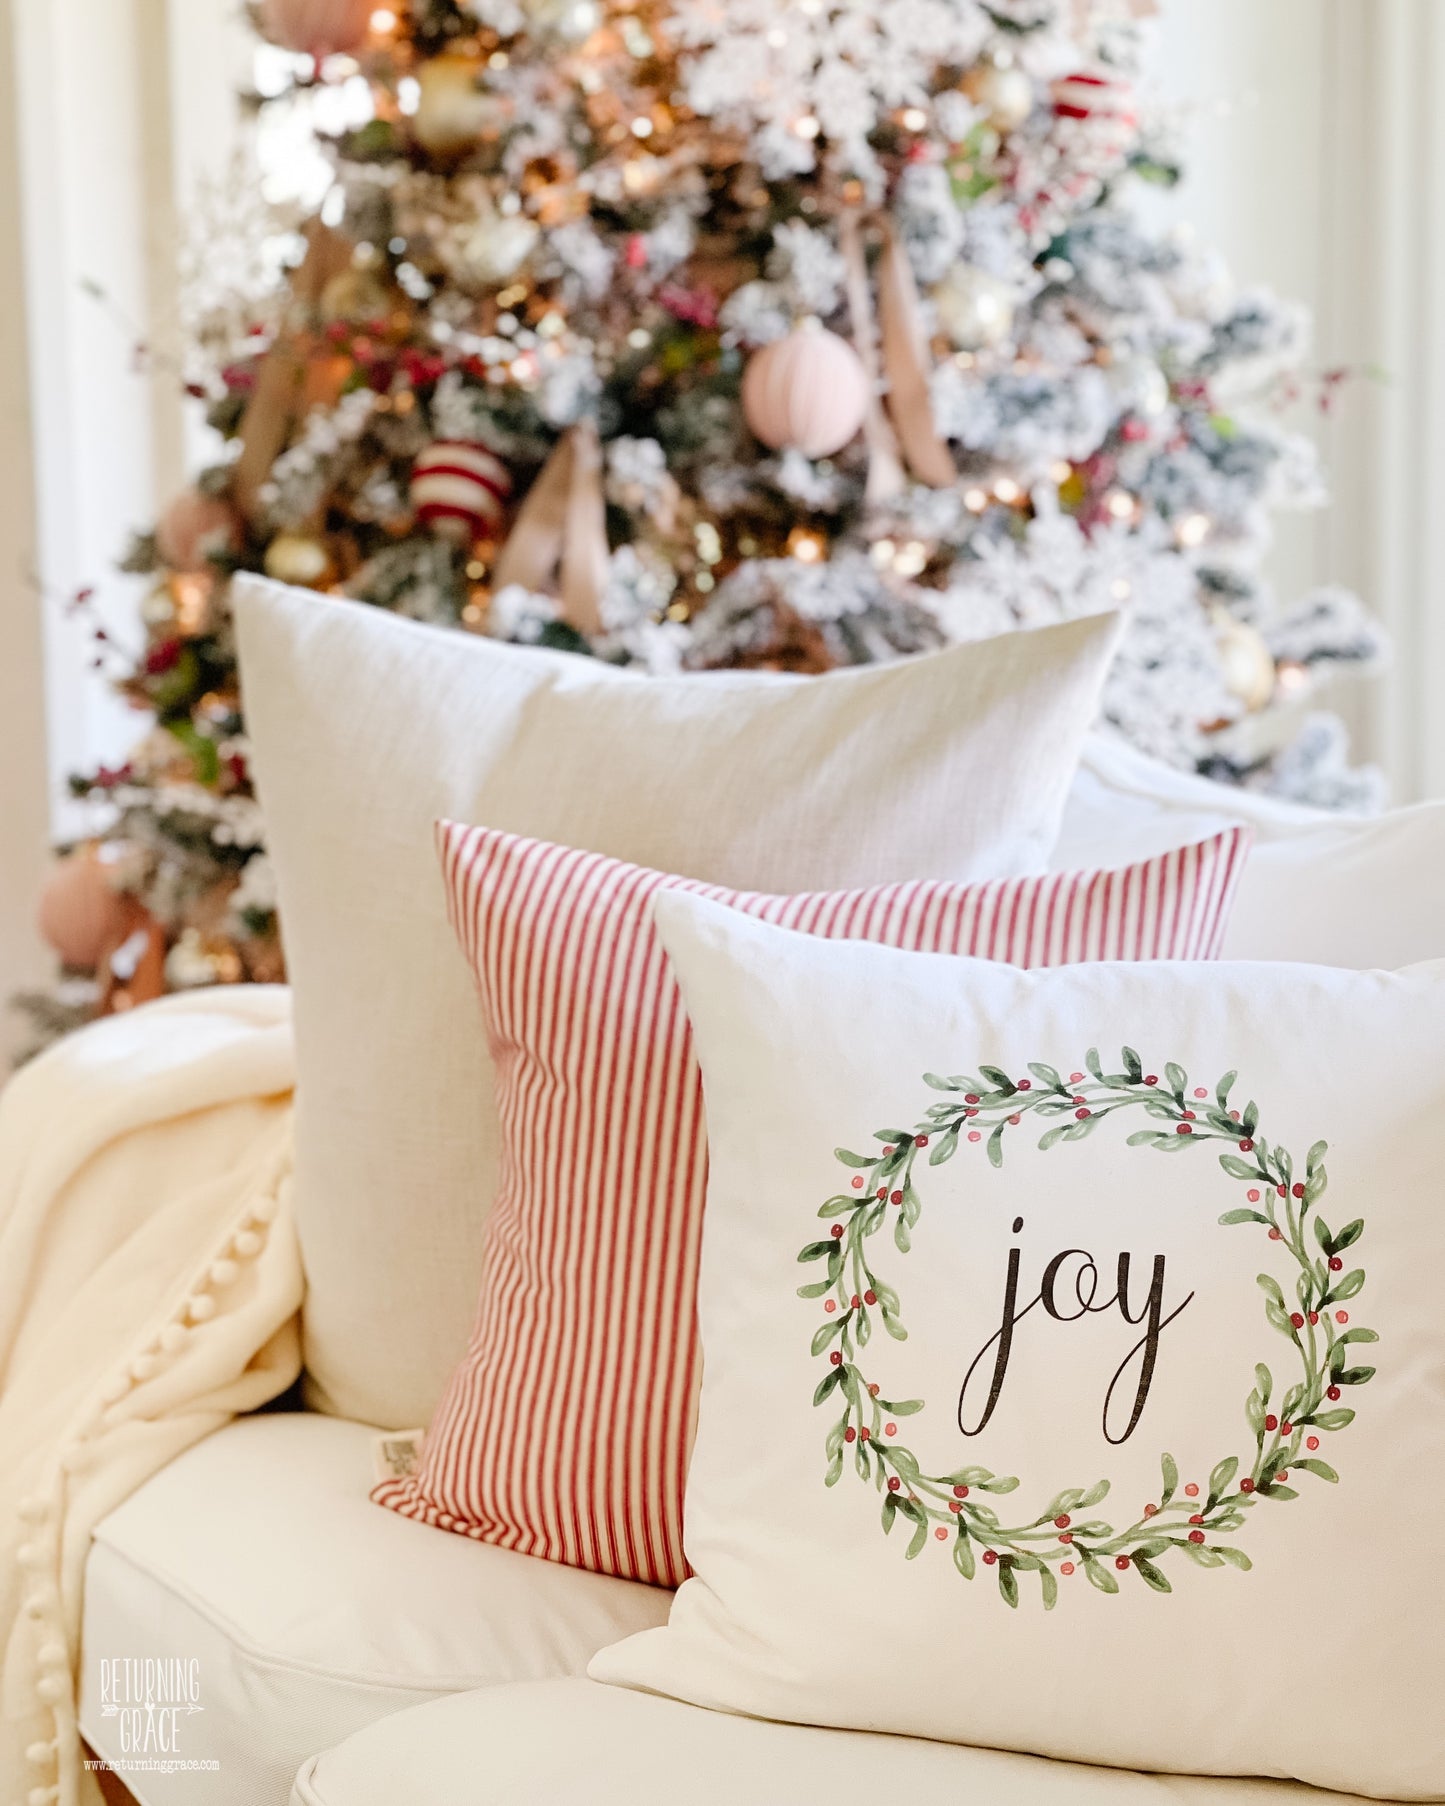 Watercolor Mistletoe Wreath with Holiday Wording Pillow Cover - Merry, Jolly, Joy, Peace, Noel, Believe, Cheer